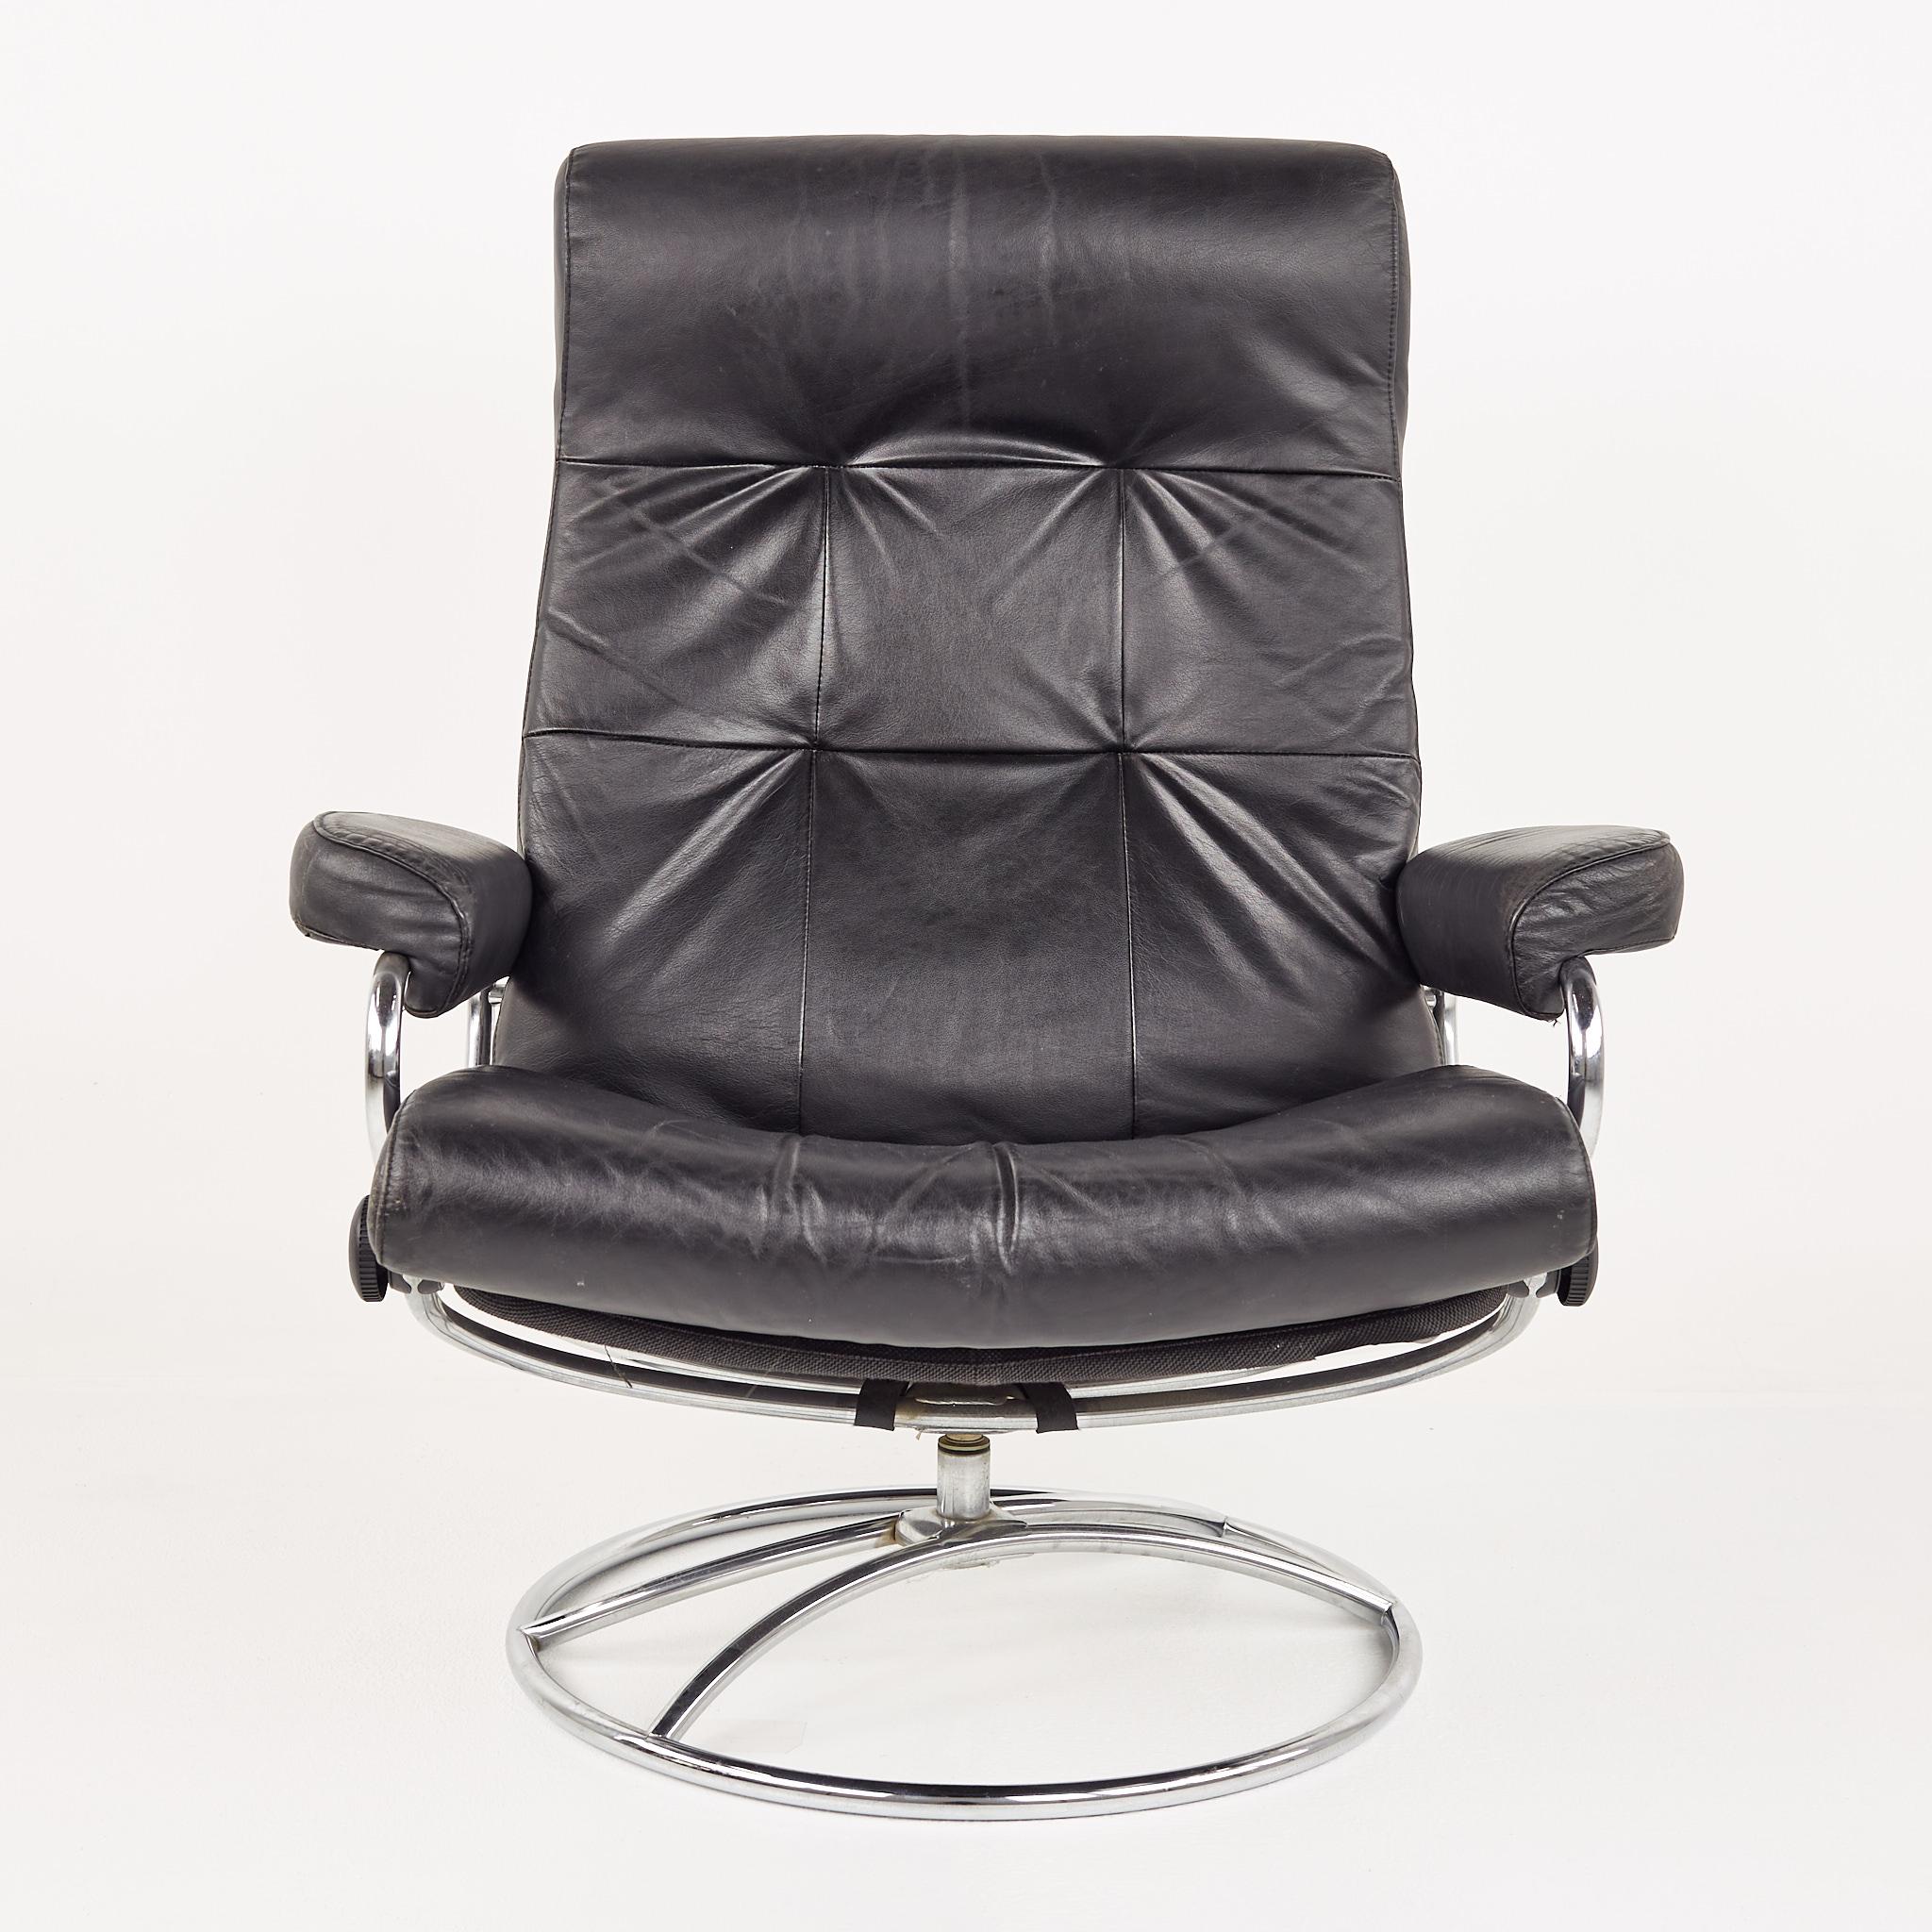 Ekrones mid century black leather and chrome lounge chair

Chair measures: 32.25 wide x 32.75 deep x 39.25 high, with a seat height of 16.5 inches and arm/chair clearance of 22.25 inches

?All pieces of furniture can be had in what we call